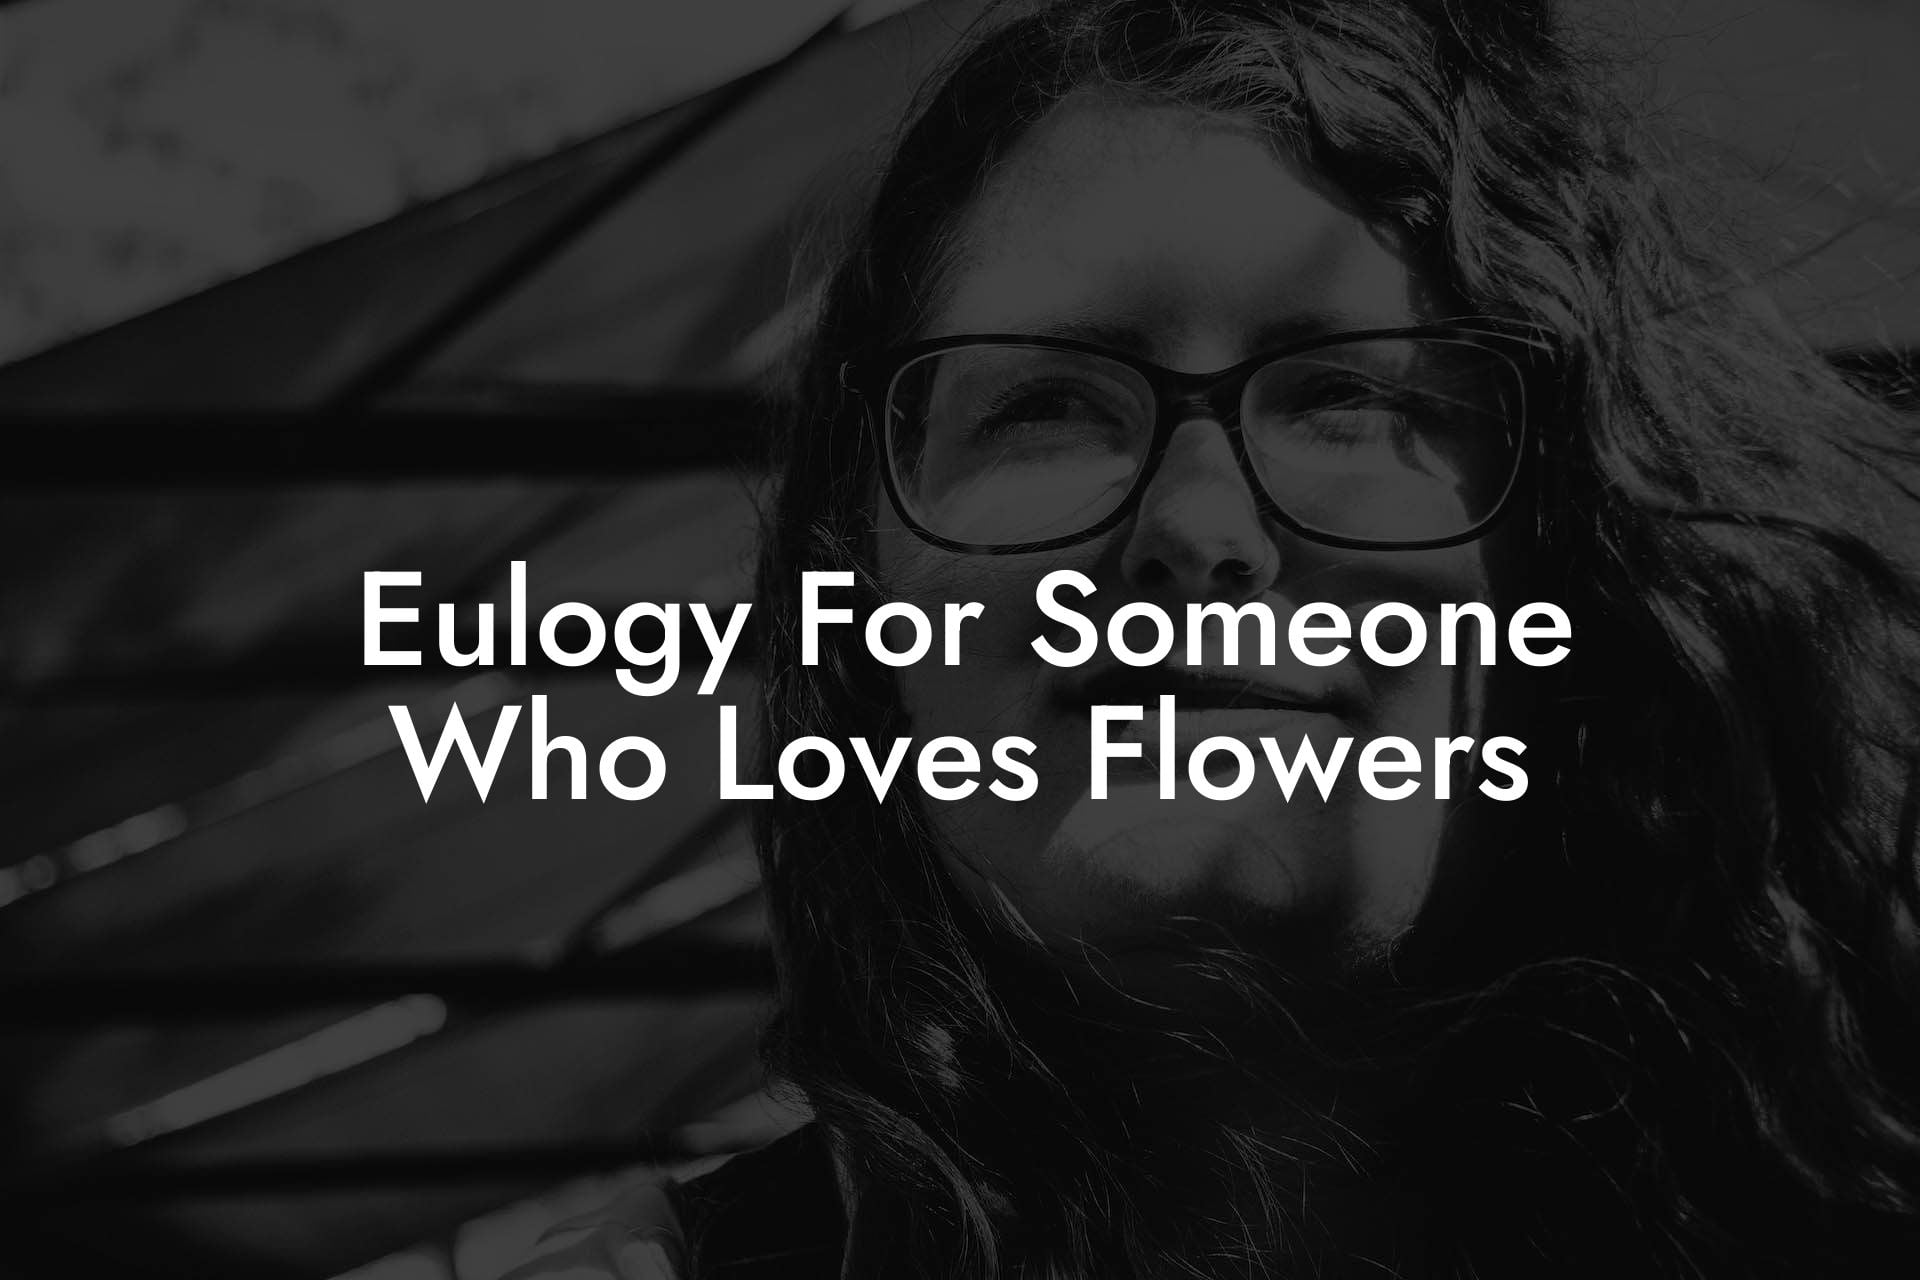 Eulogy For Someone Who Loves Flowers